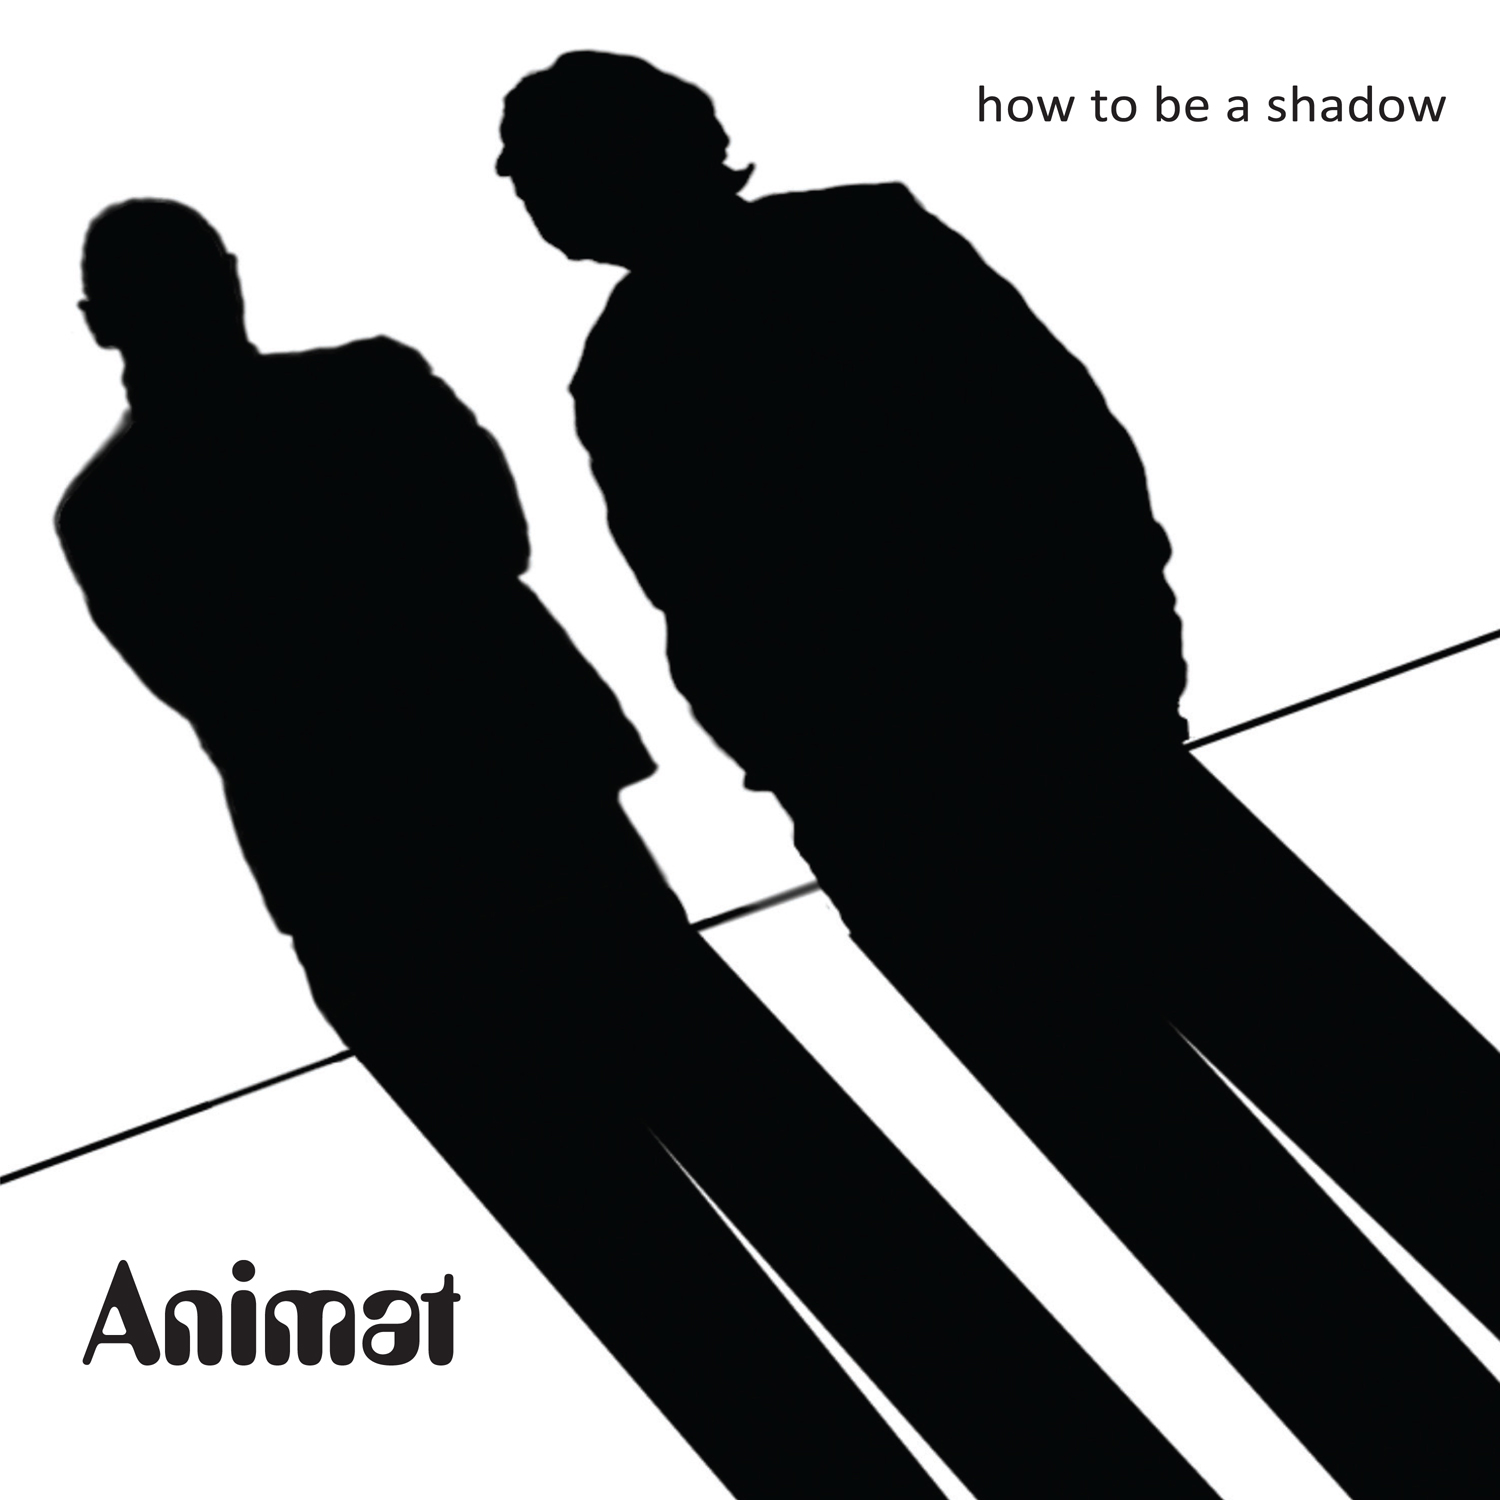 Animat – How to be a shadow